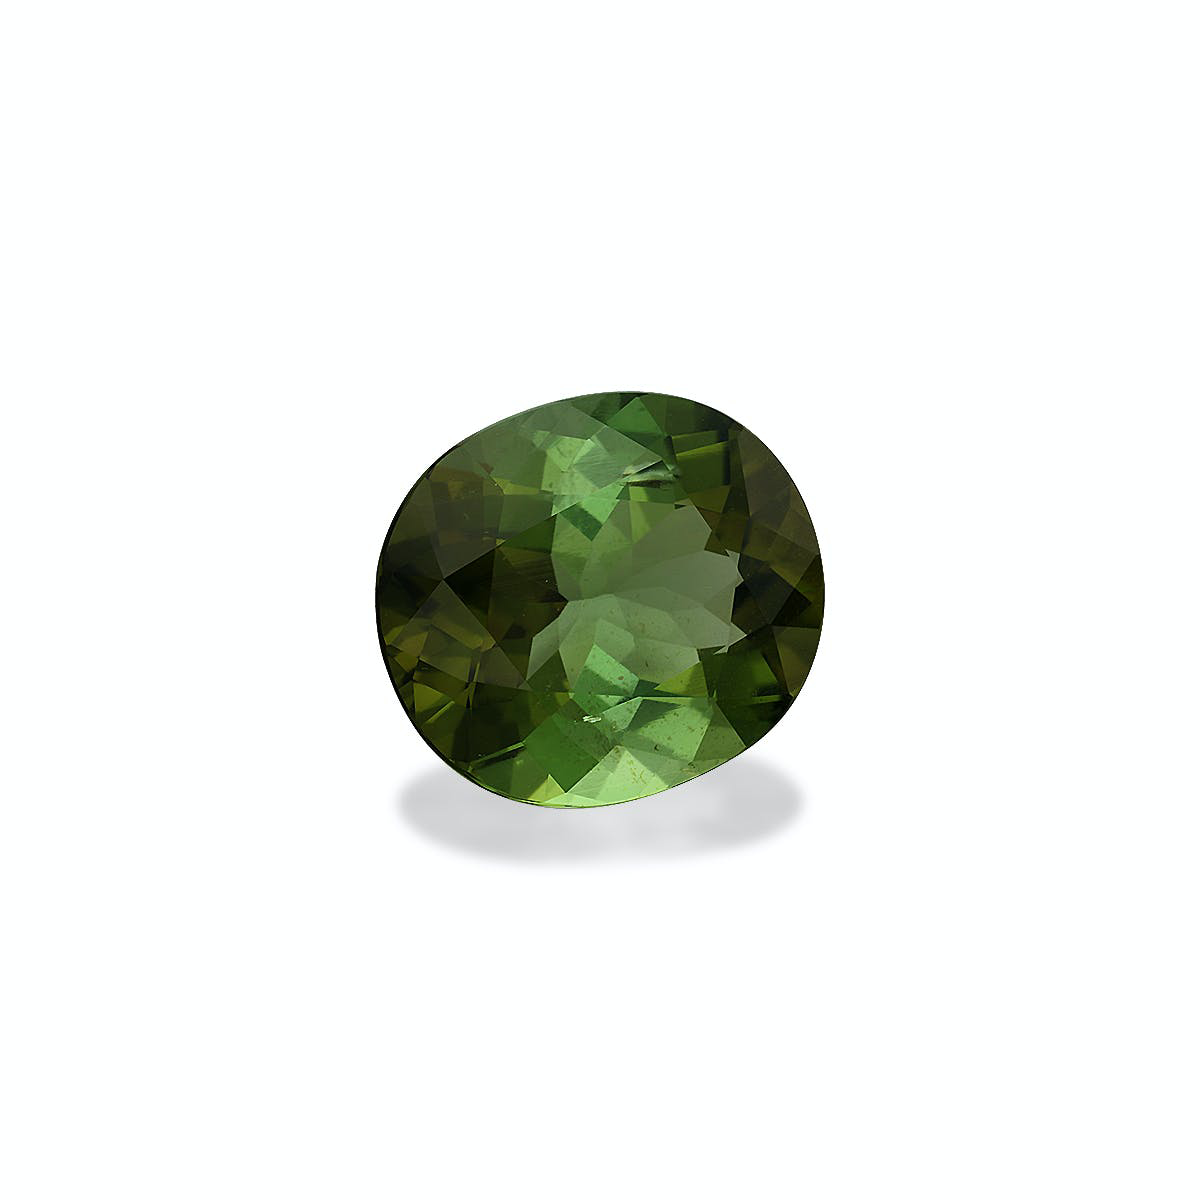 Picture of Moss Green Tourmaline 9.38ct - 15x13mm (TG0125)